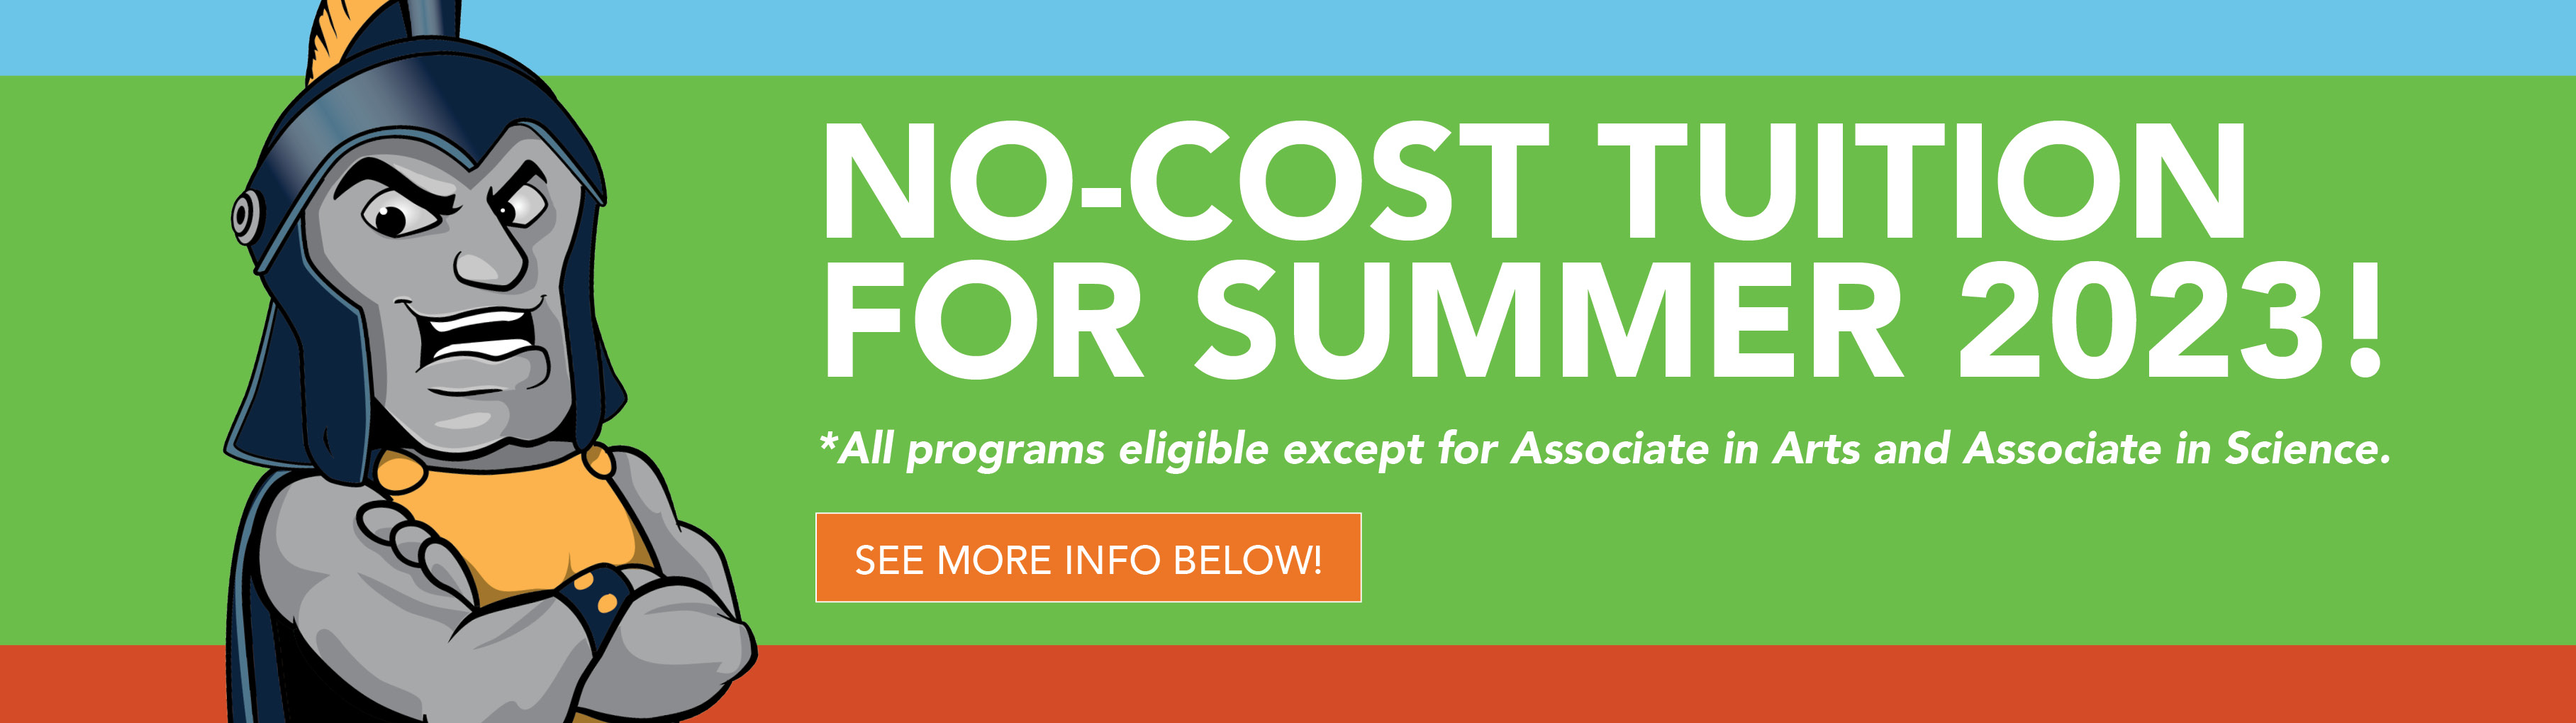 NoCost Tuition for Summer